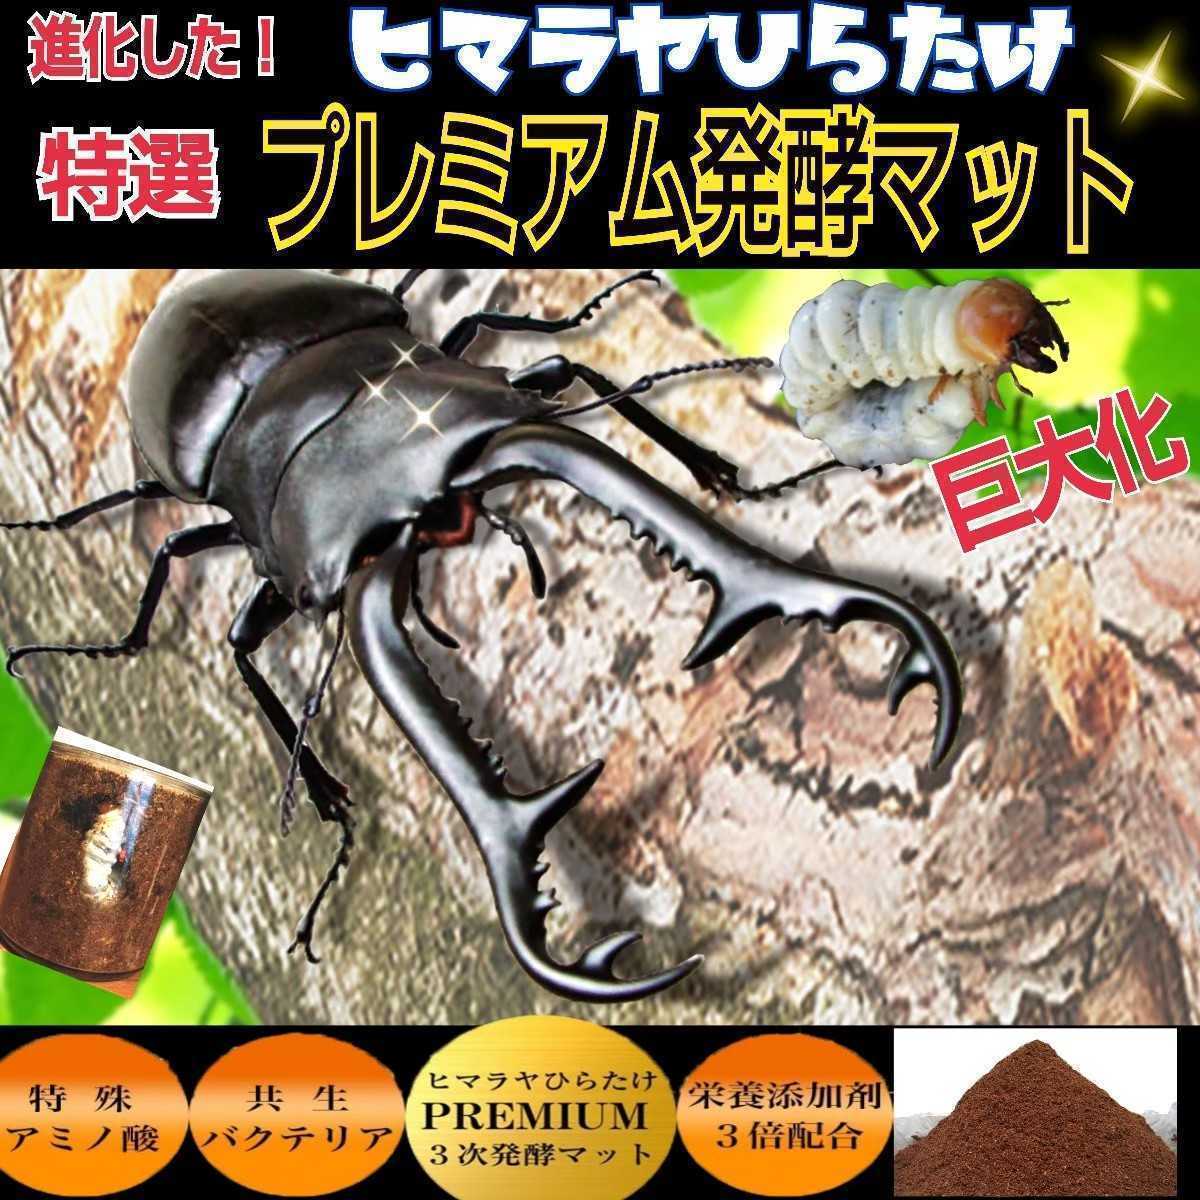  Miyama ....! stag beetle larva . inserting only! convenience.! 800ml clear bottle entering premium departure . mat [6ps.@] nutrition addition agent 3 times combination 